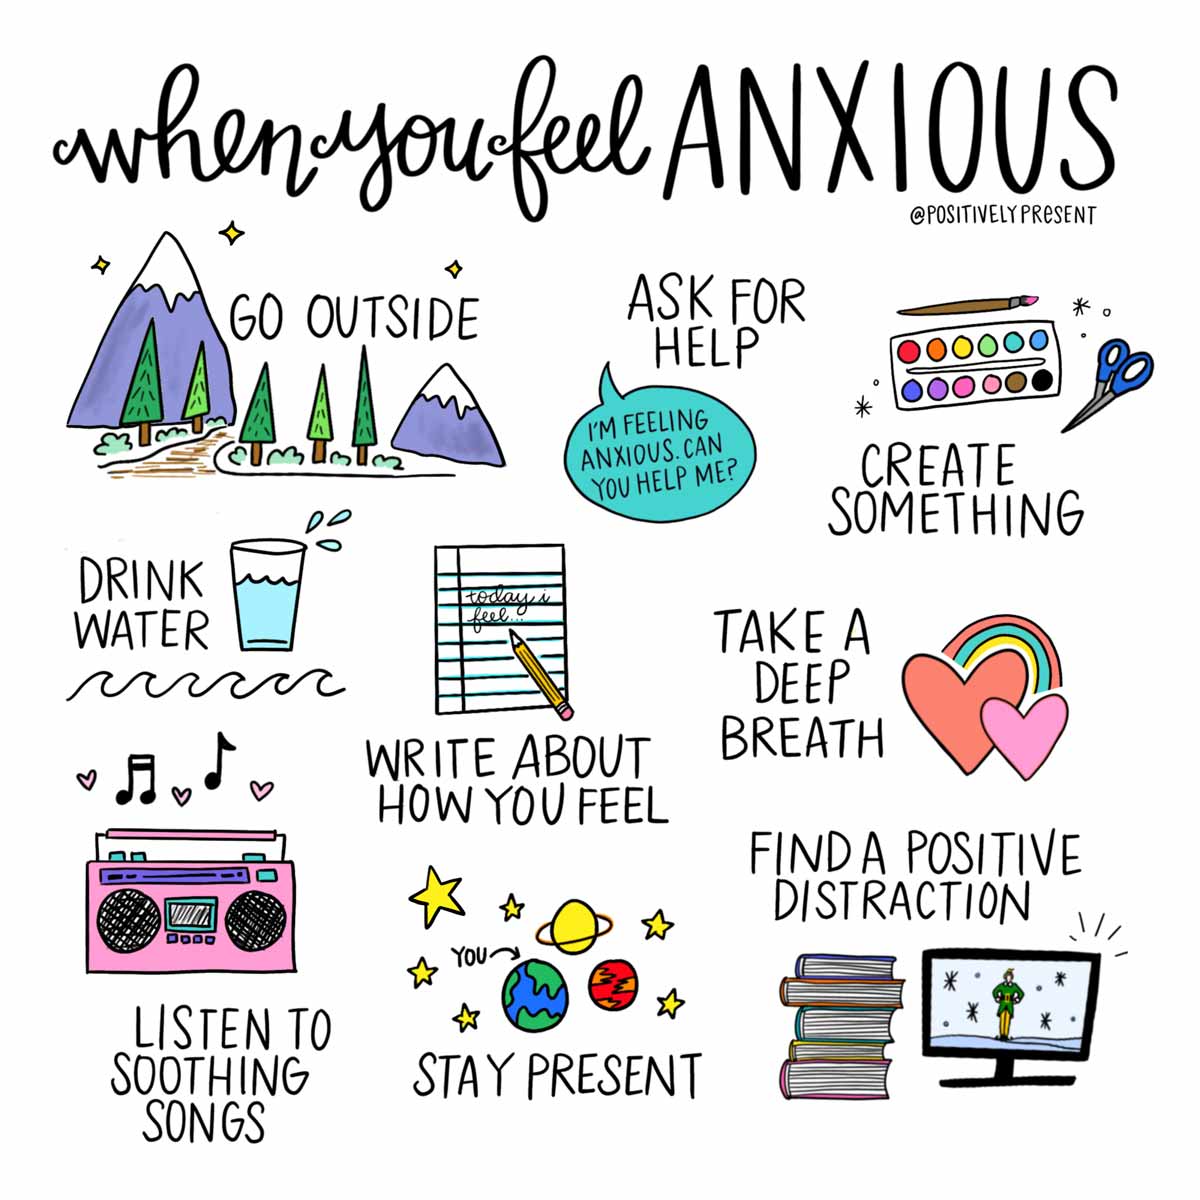 drawings show positive activities to do when you feel anxious.